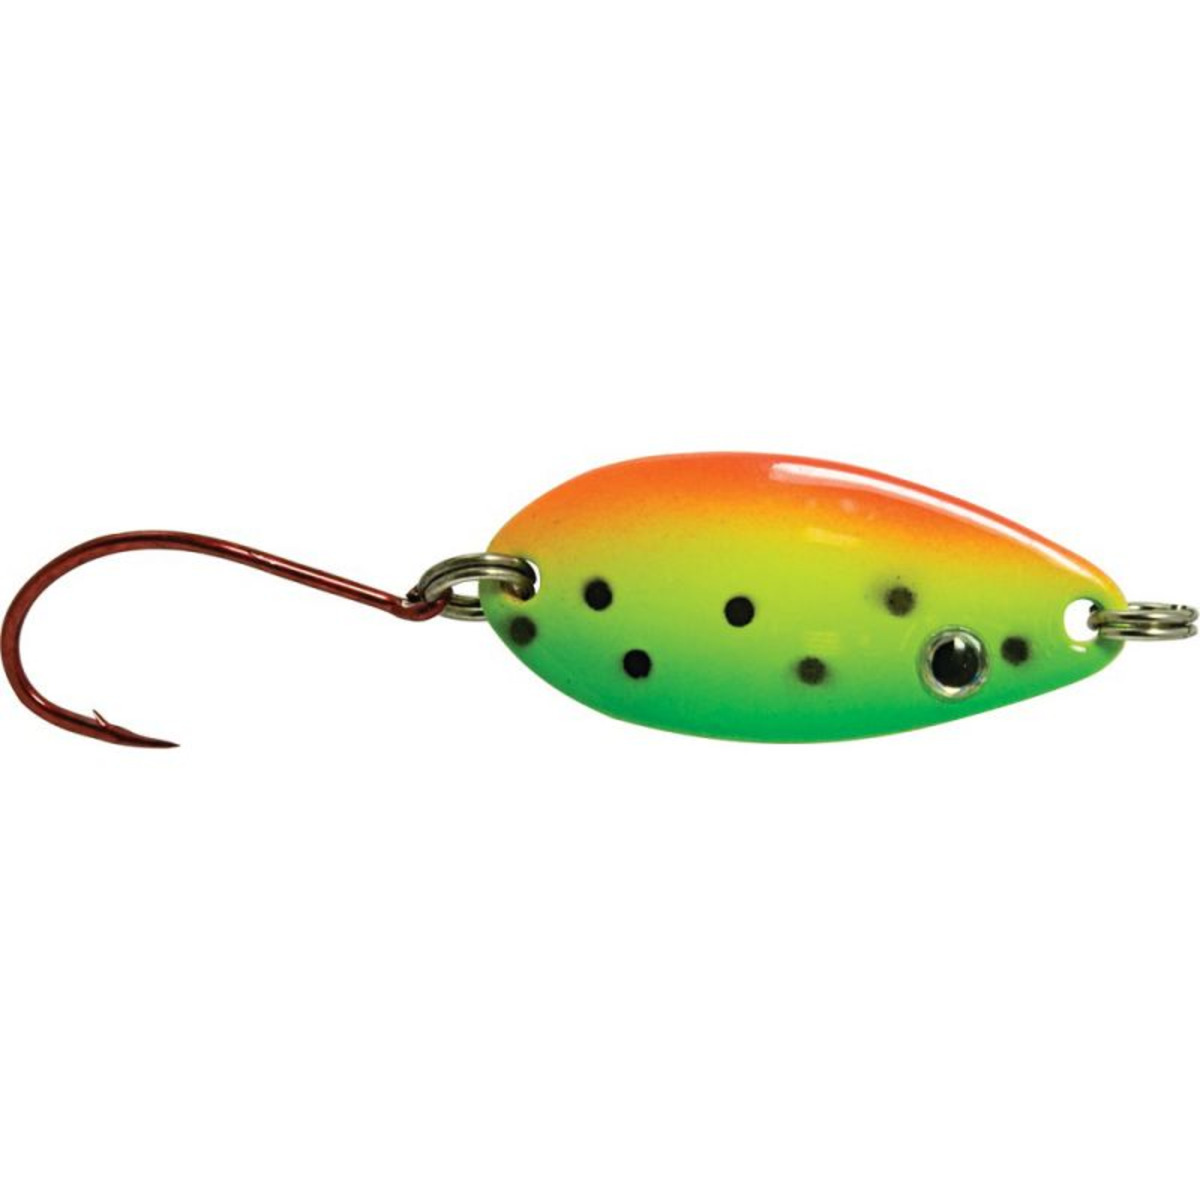 Rapture Brown Trout - 3.0 g - 32 mm - 10 - FT